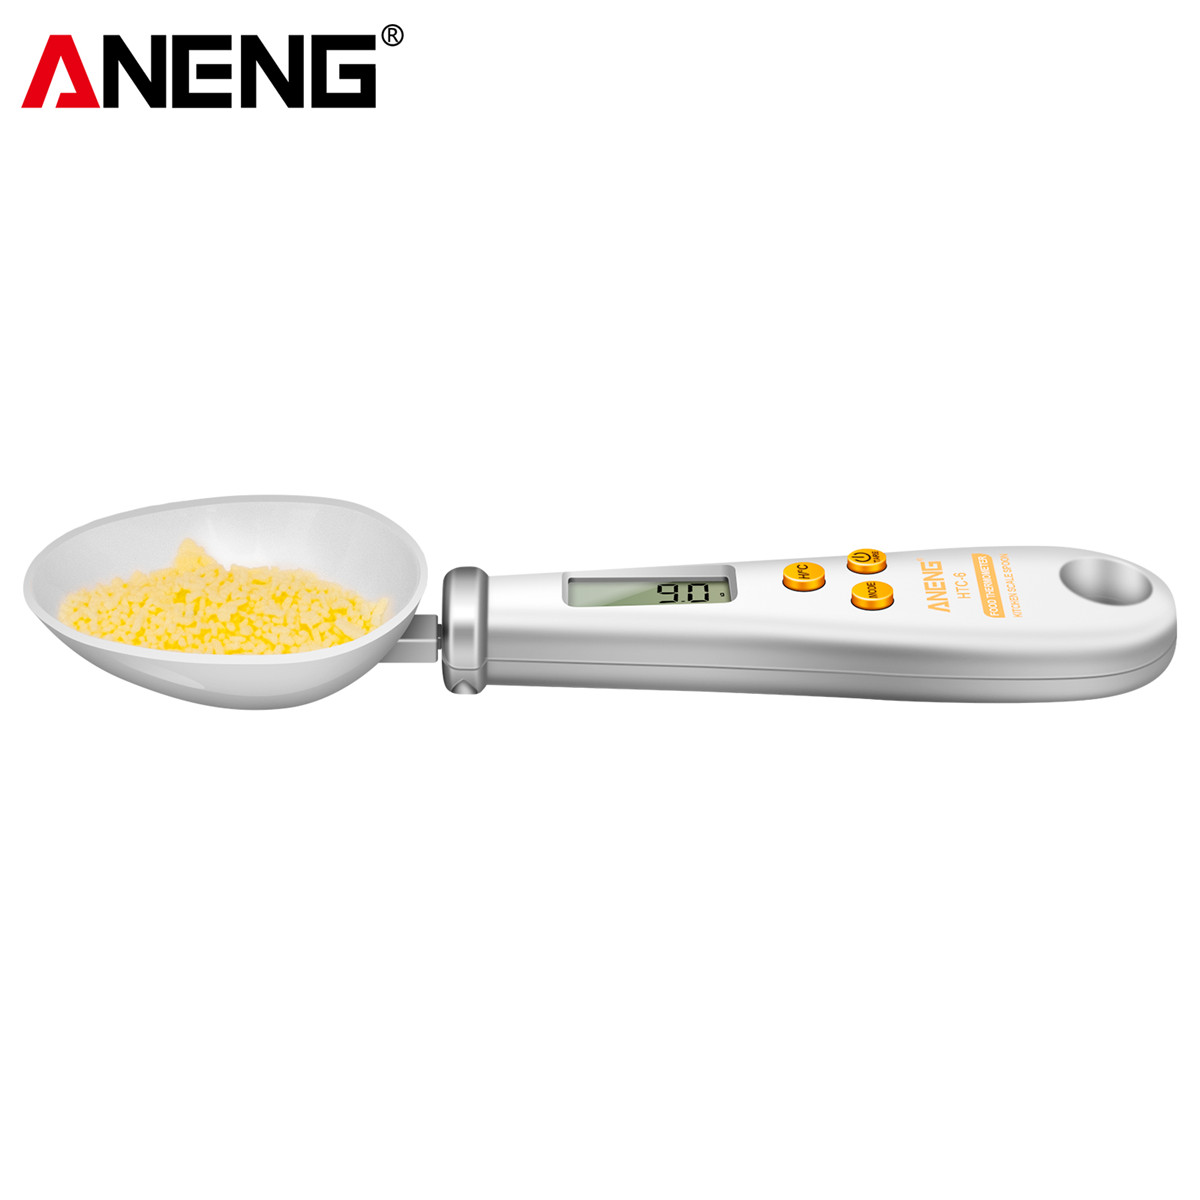 ANENG HTC-6 Multifunctional Kitchen Tool Electronic Weighing Spoon with Integrated Food Thermometer Precise Gram/Ounce/Pound Conversion Durable ABS and Stainless Steel